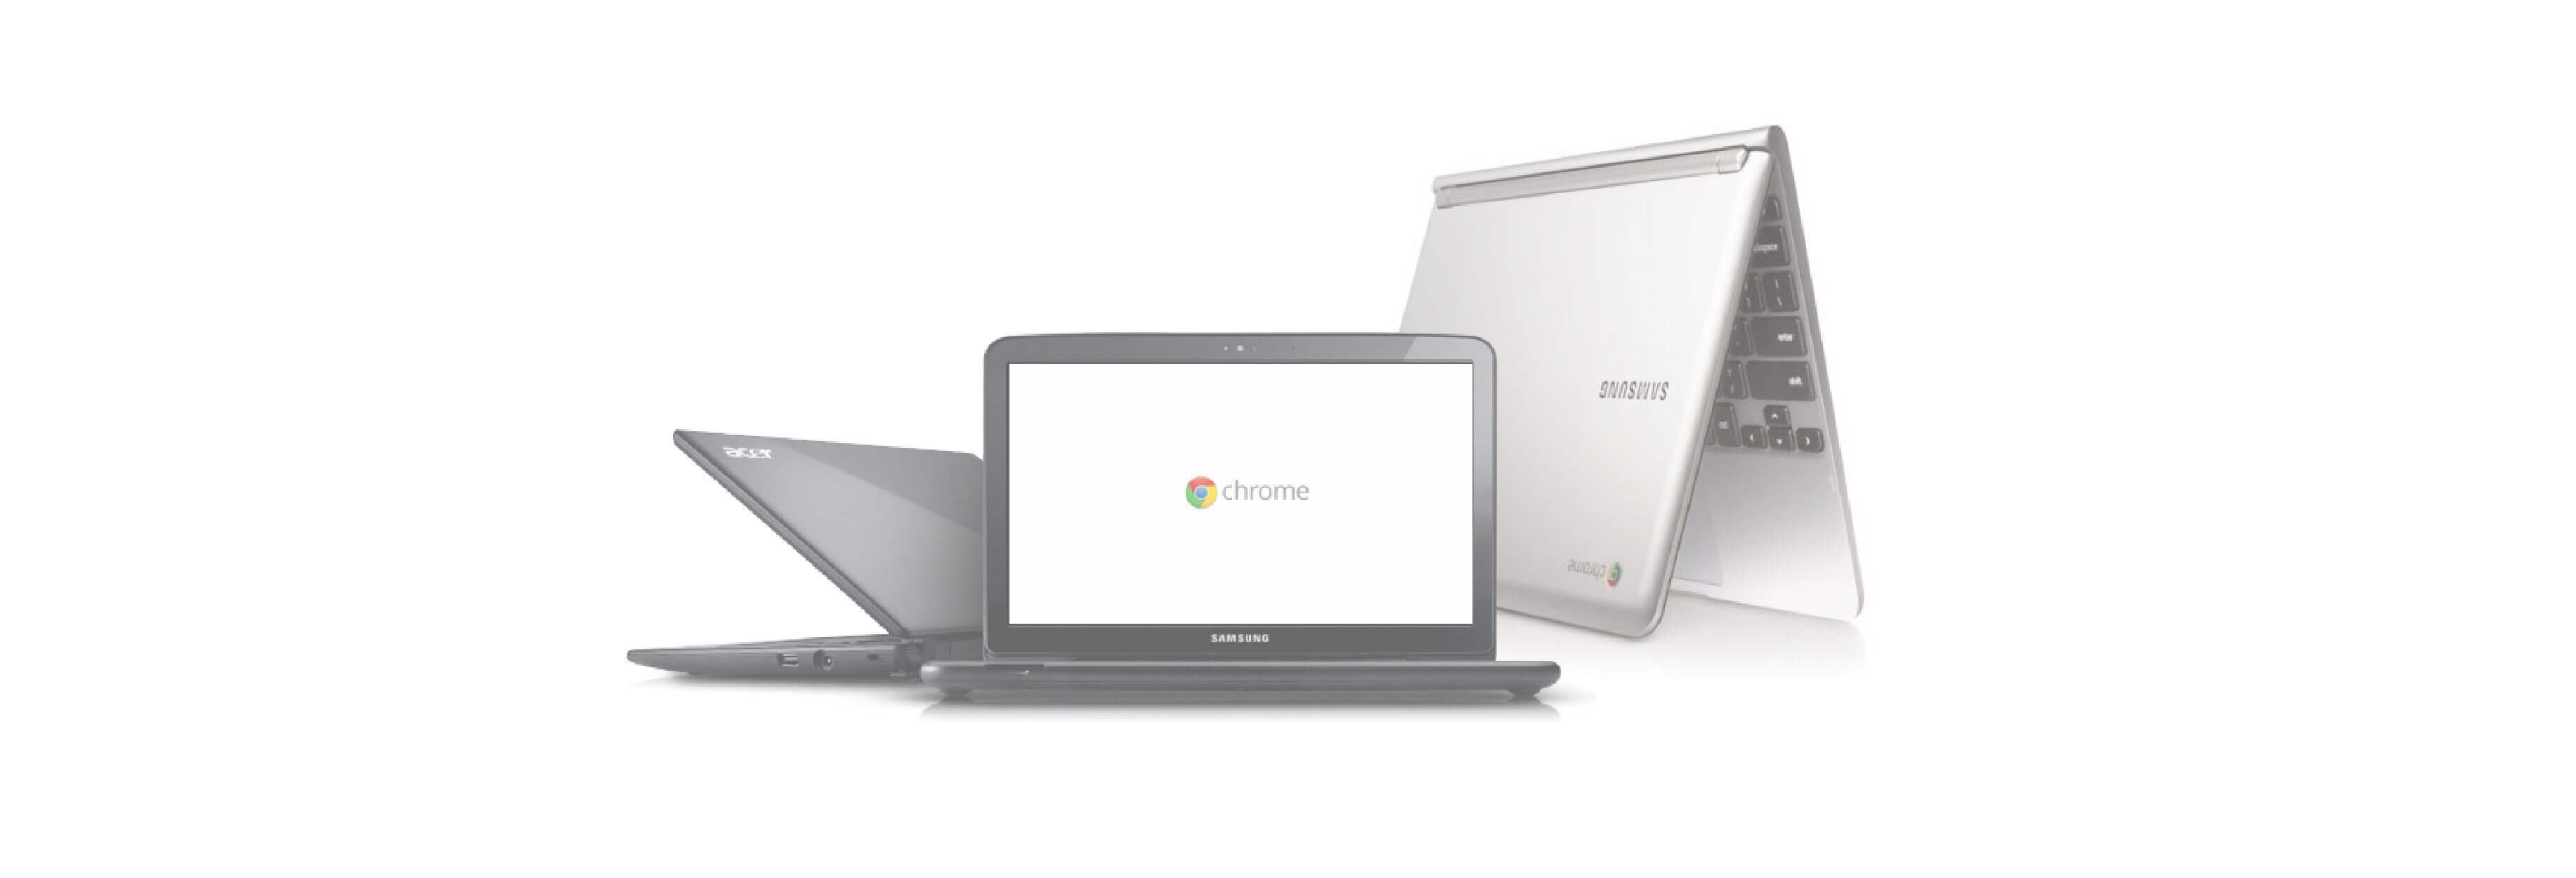 Refurbished Chromebook- Looking for the absolute best laptop in the market?